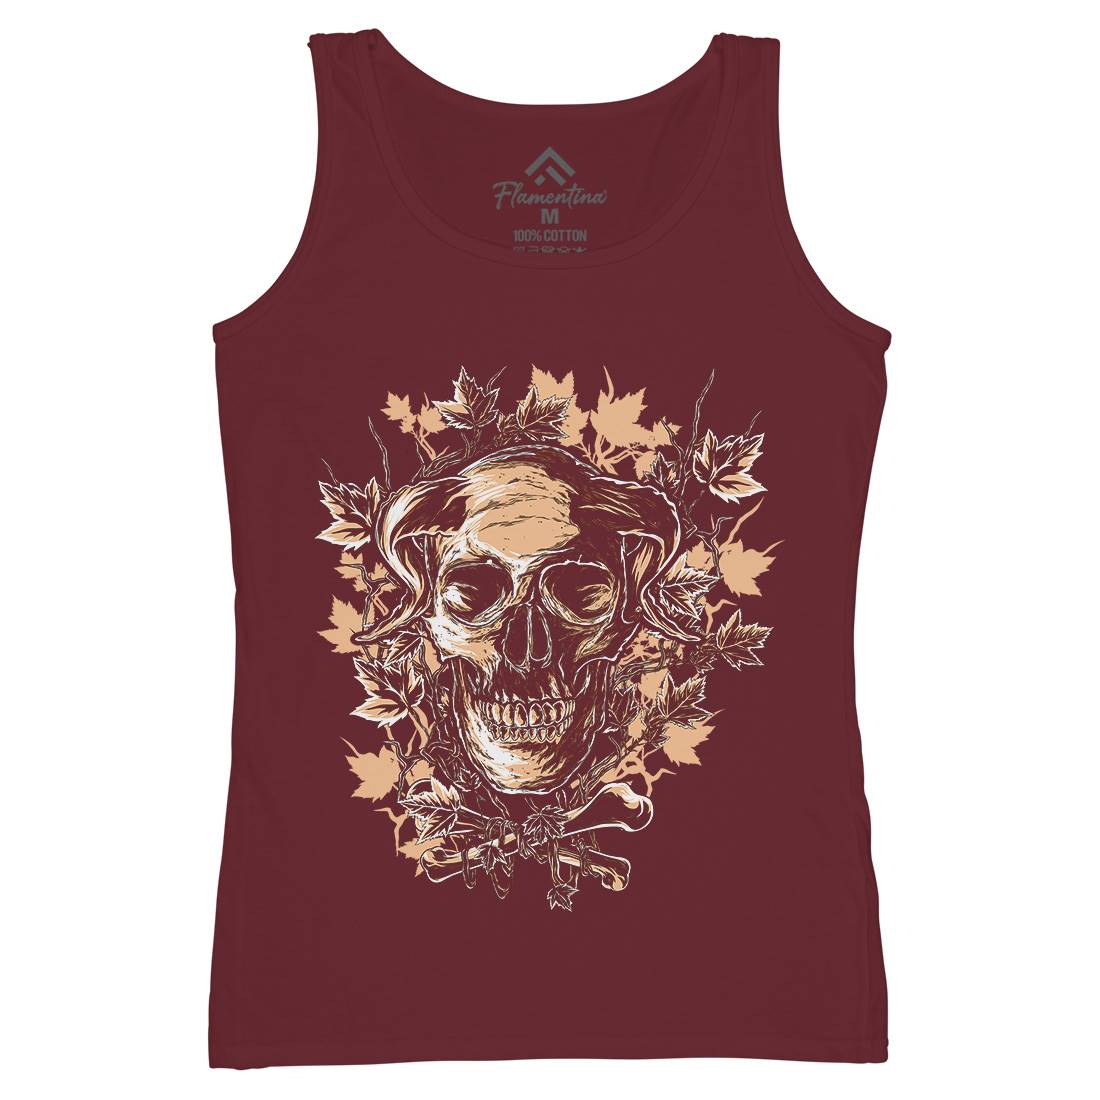 The Horned One Womens Organic Tank Top Vest Horror C986